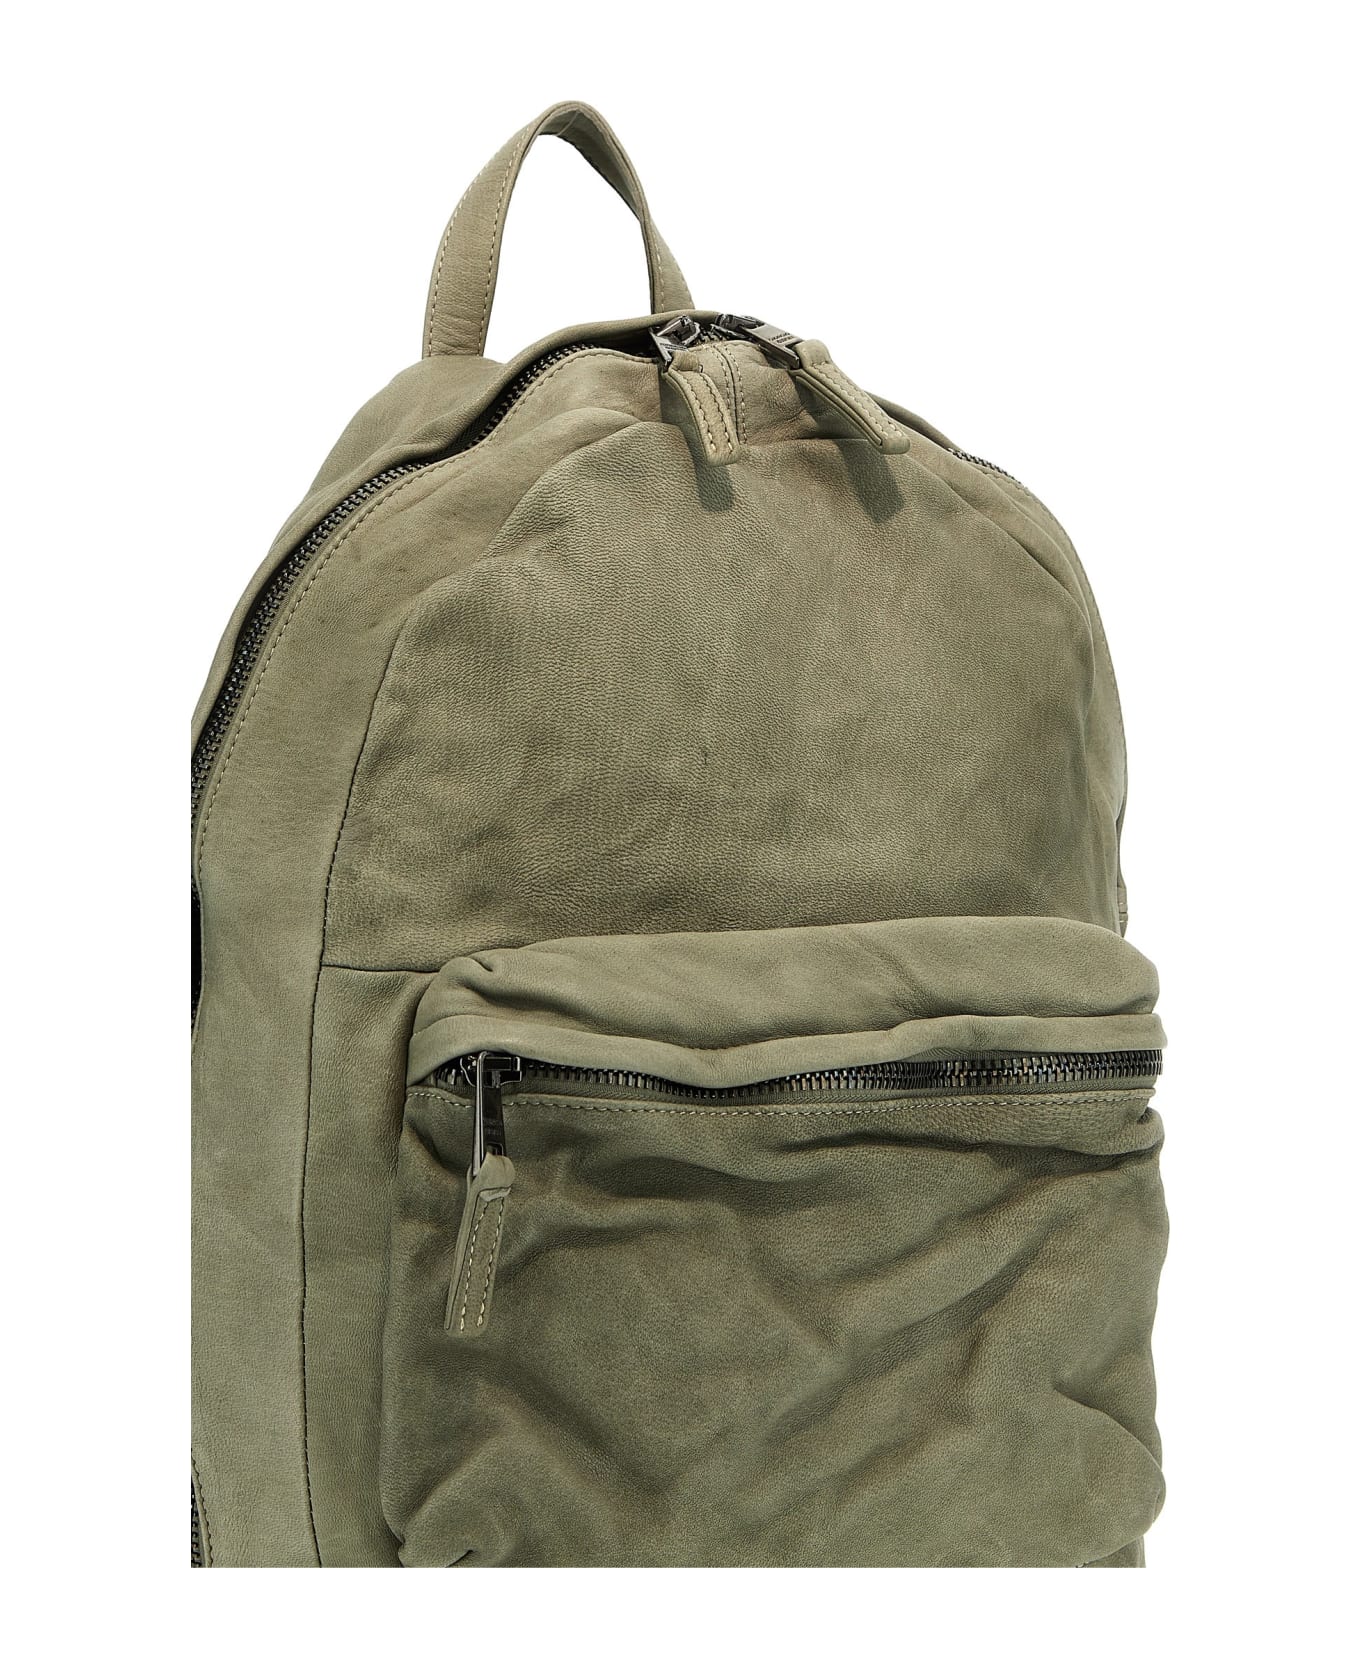 Giorgio Brato Leather Backpack - Green バックパック